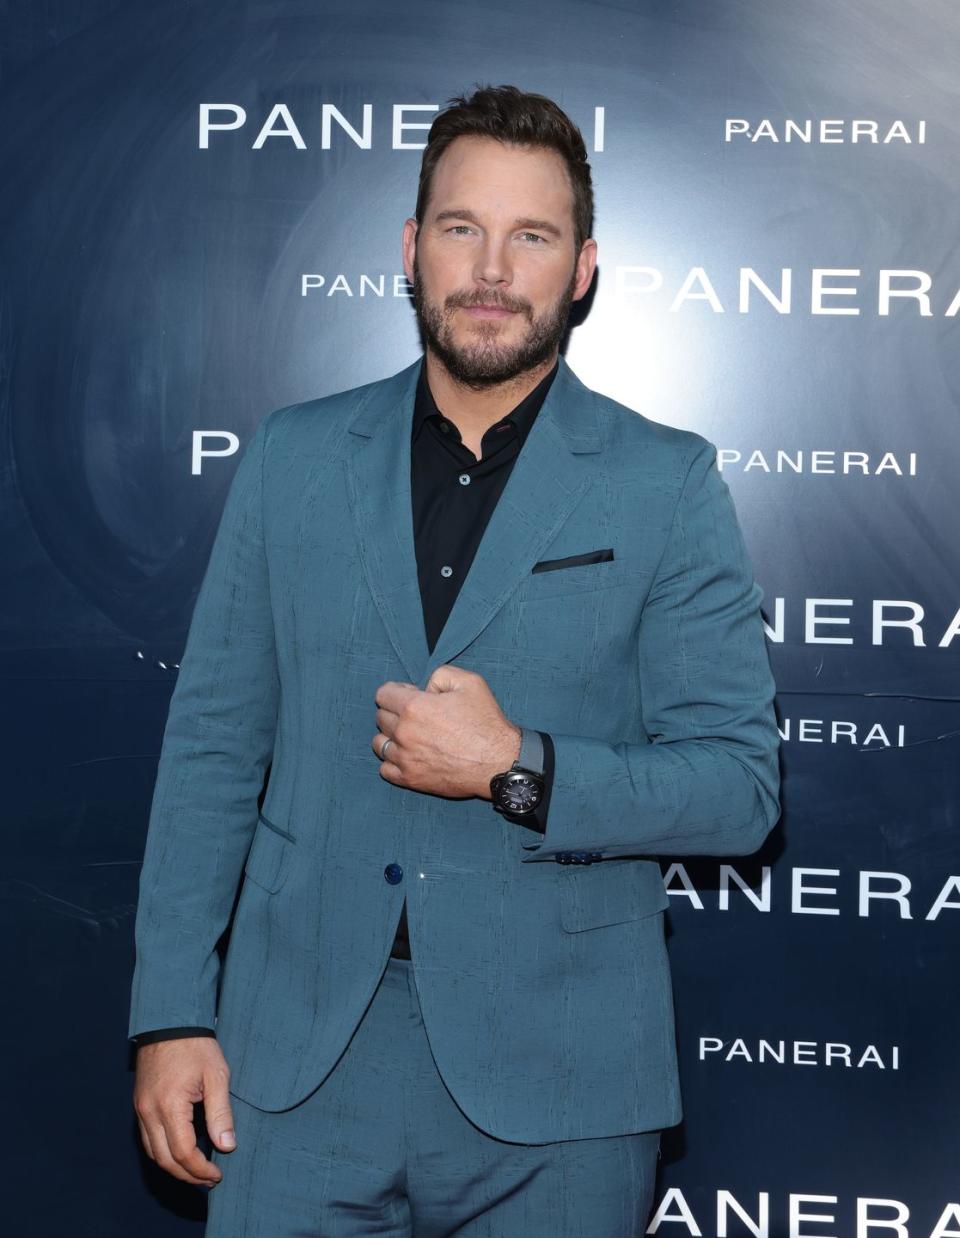 Chris Pratt, a man stands there and looks into the camera with a neutral expression, he has short dark brown hair and a beard, he is wearing a black shirt with a blue jacket